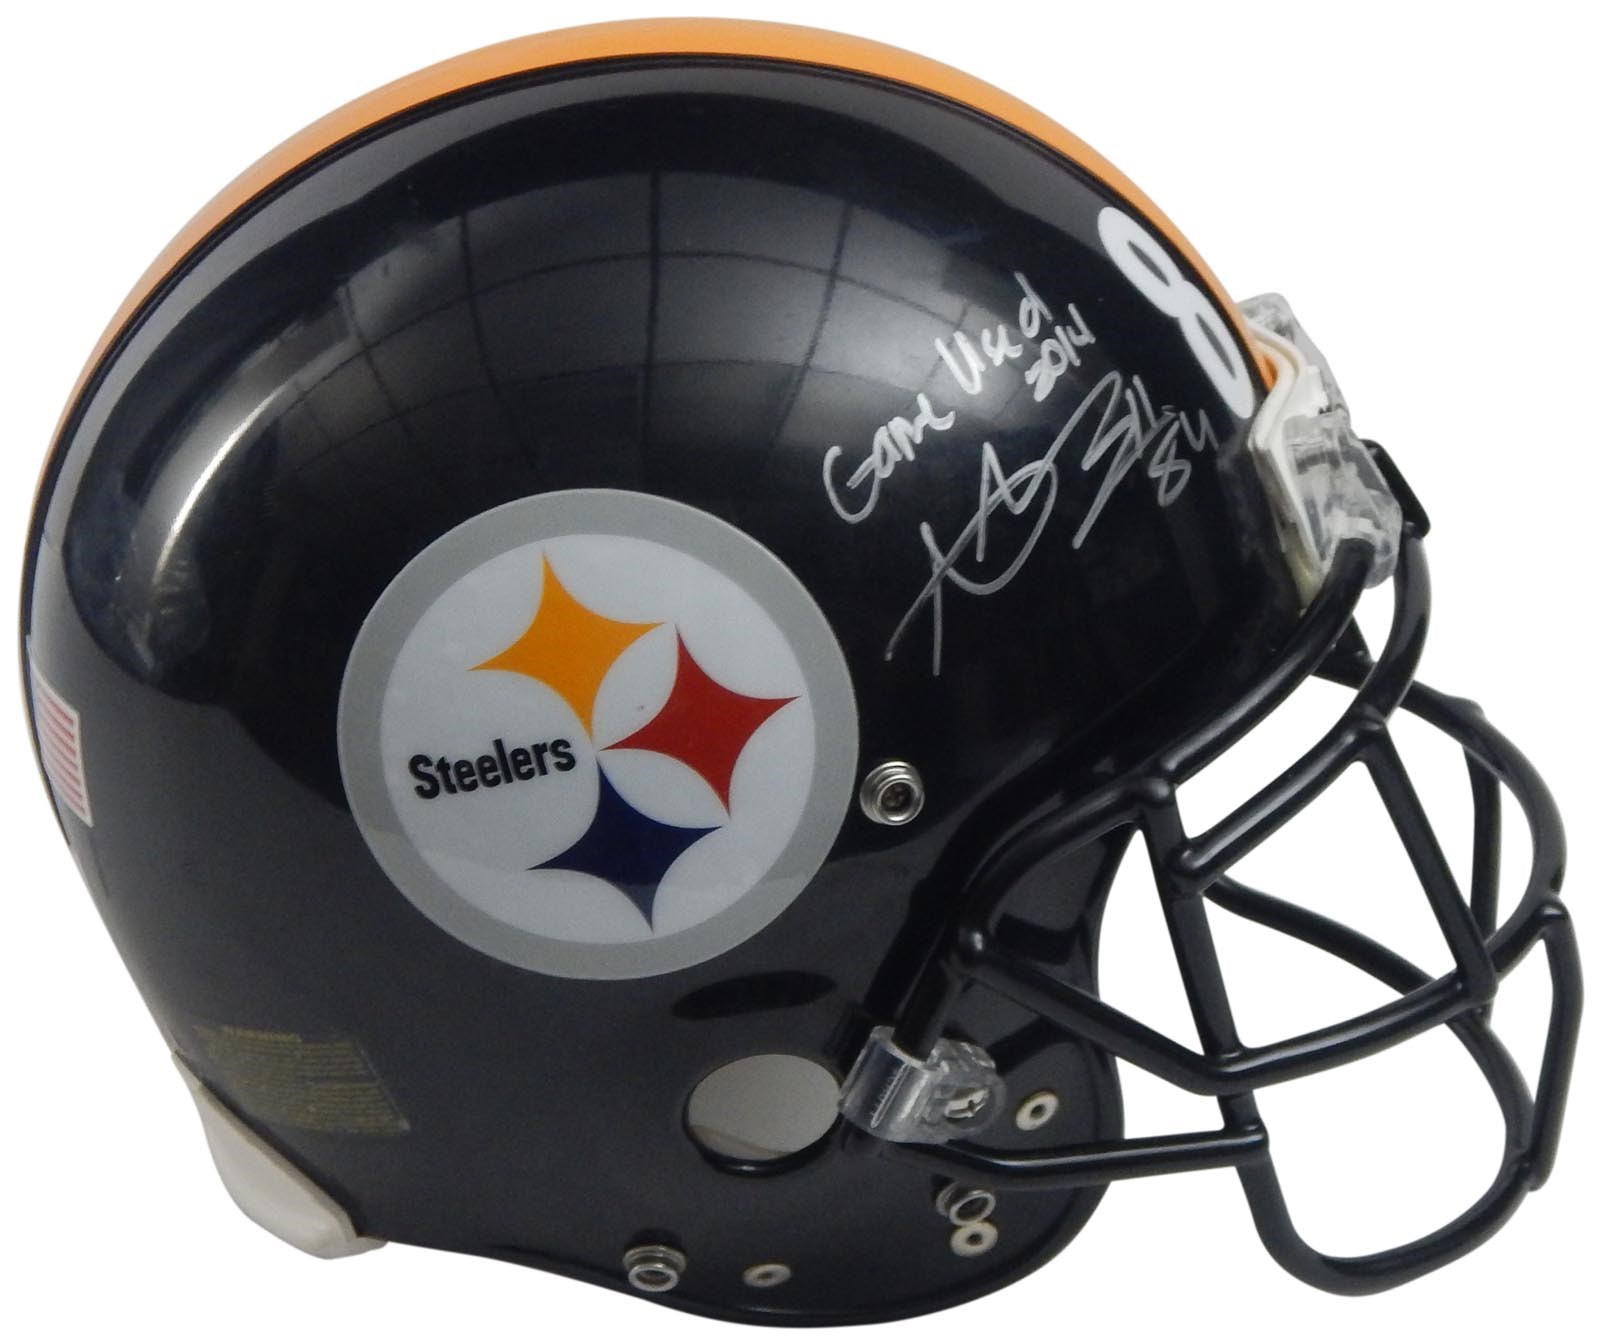 Football - Antonio Brown Pittsburgh Steelers Game Used Training Camp Helmet (Acquired Directly From Brown)